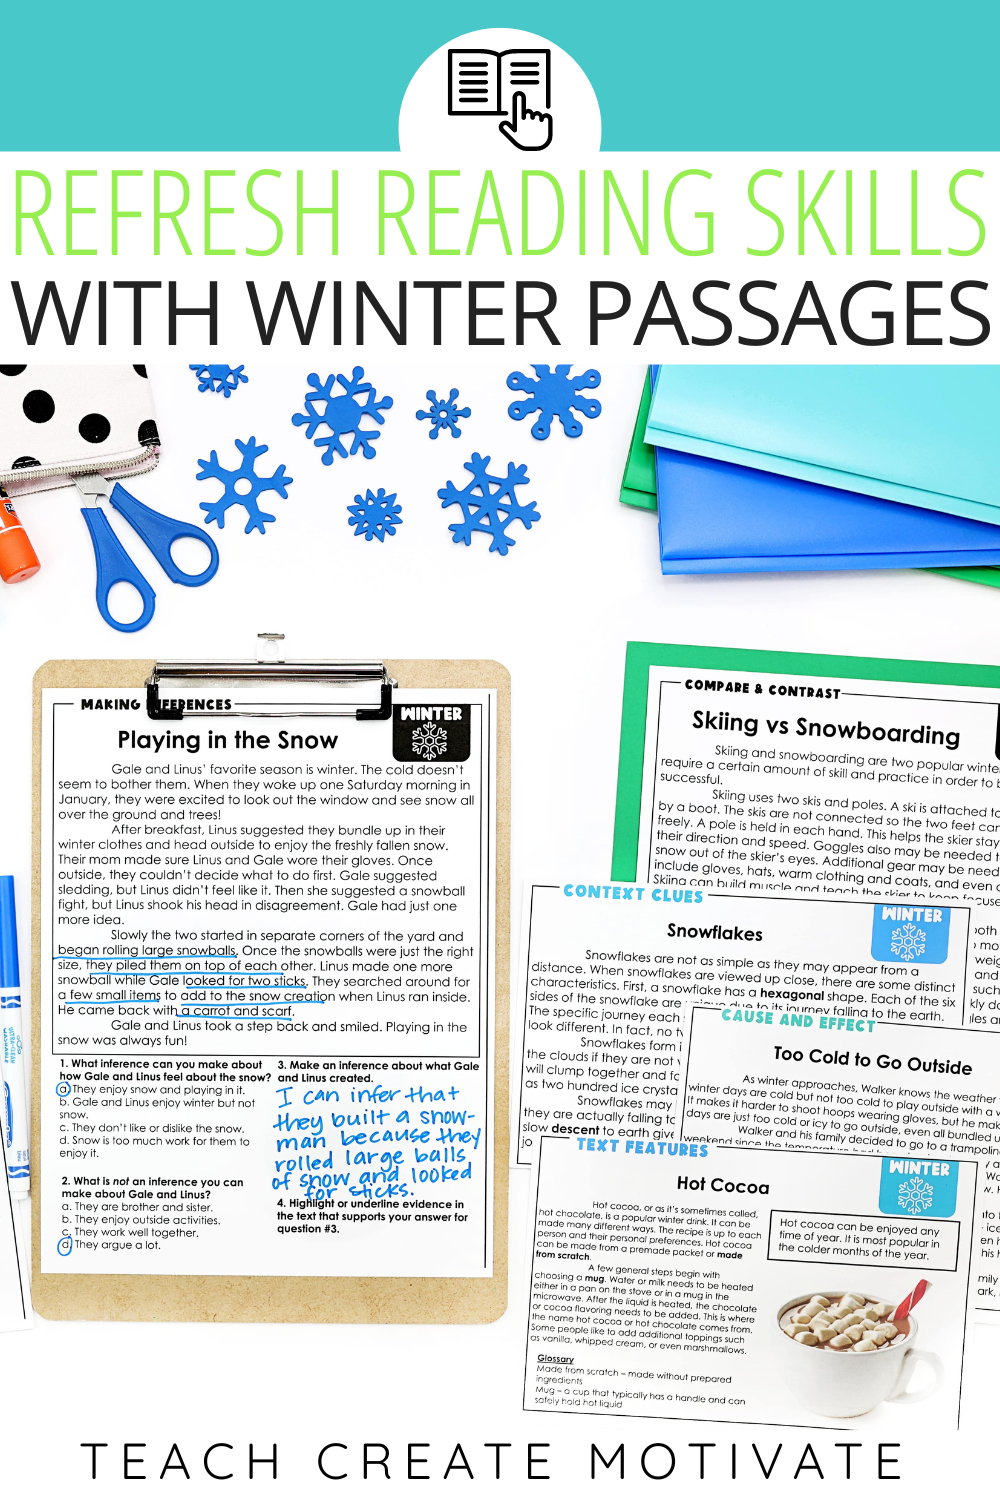 Practice essential reading skills with reading comprehension passages! These themed passages are a no-prep way to spiral review reading skills the entire school year. Easily use them in stations and small groups. The comprehension passages with questions can be assigned digitally or printed out for a quick check-in with your students. (elementary, test review, reading center, exit ticket, winter, seasonal review)